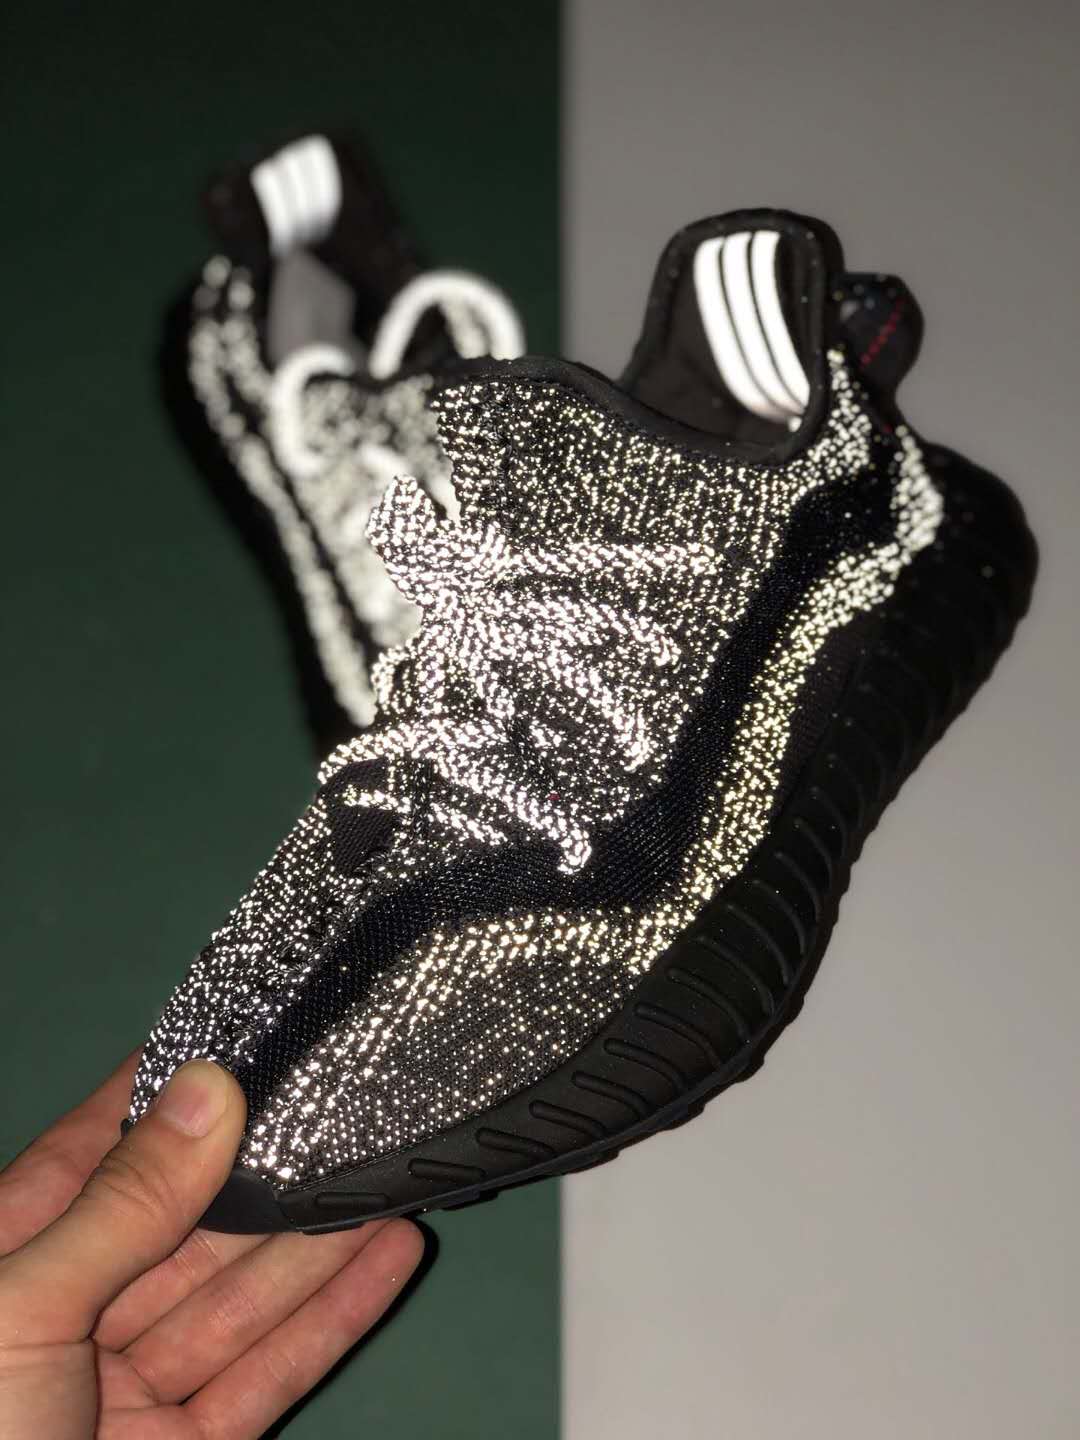 Adidas Yeezy Boost 350 V3 FU9015 - Exceptional Style and Performance